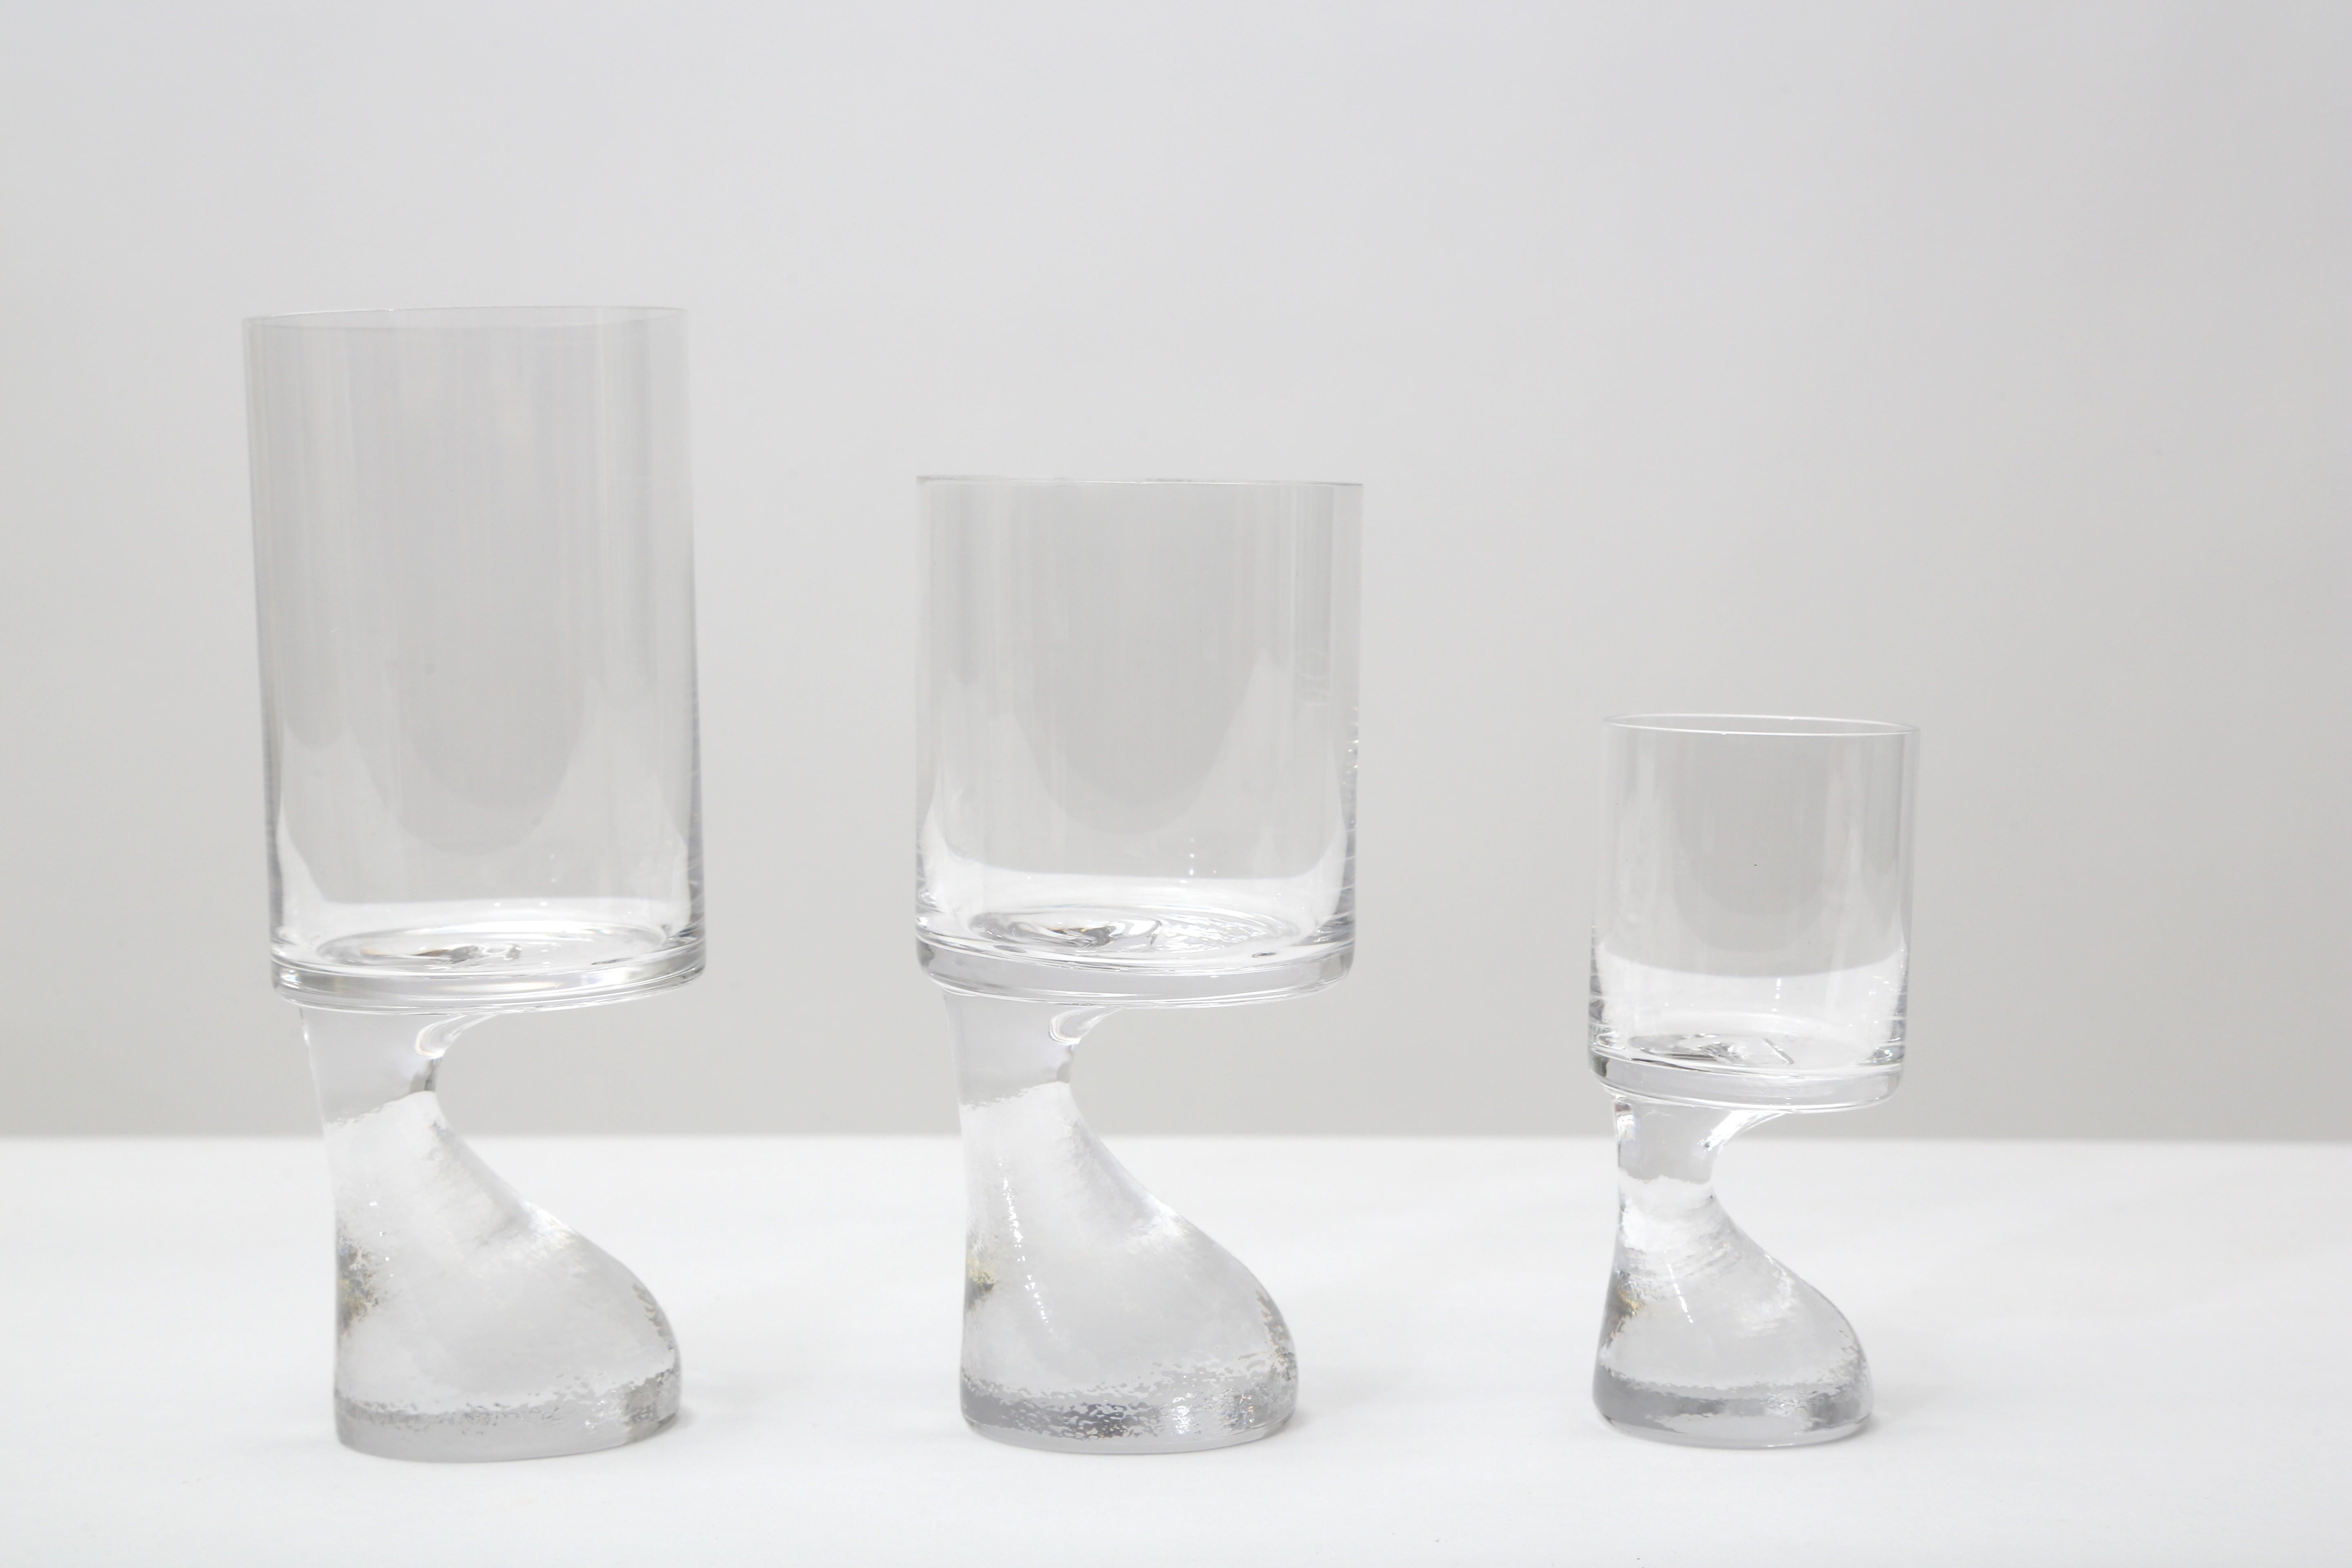 A beautiful set of 36 Joe Colombo Asimmetrico glasses .Designed by Colombo in 1964, made of
hand blown crystal glass by Riedel Austria.
3 different sizes
12 large- 6 3/4